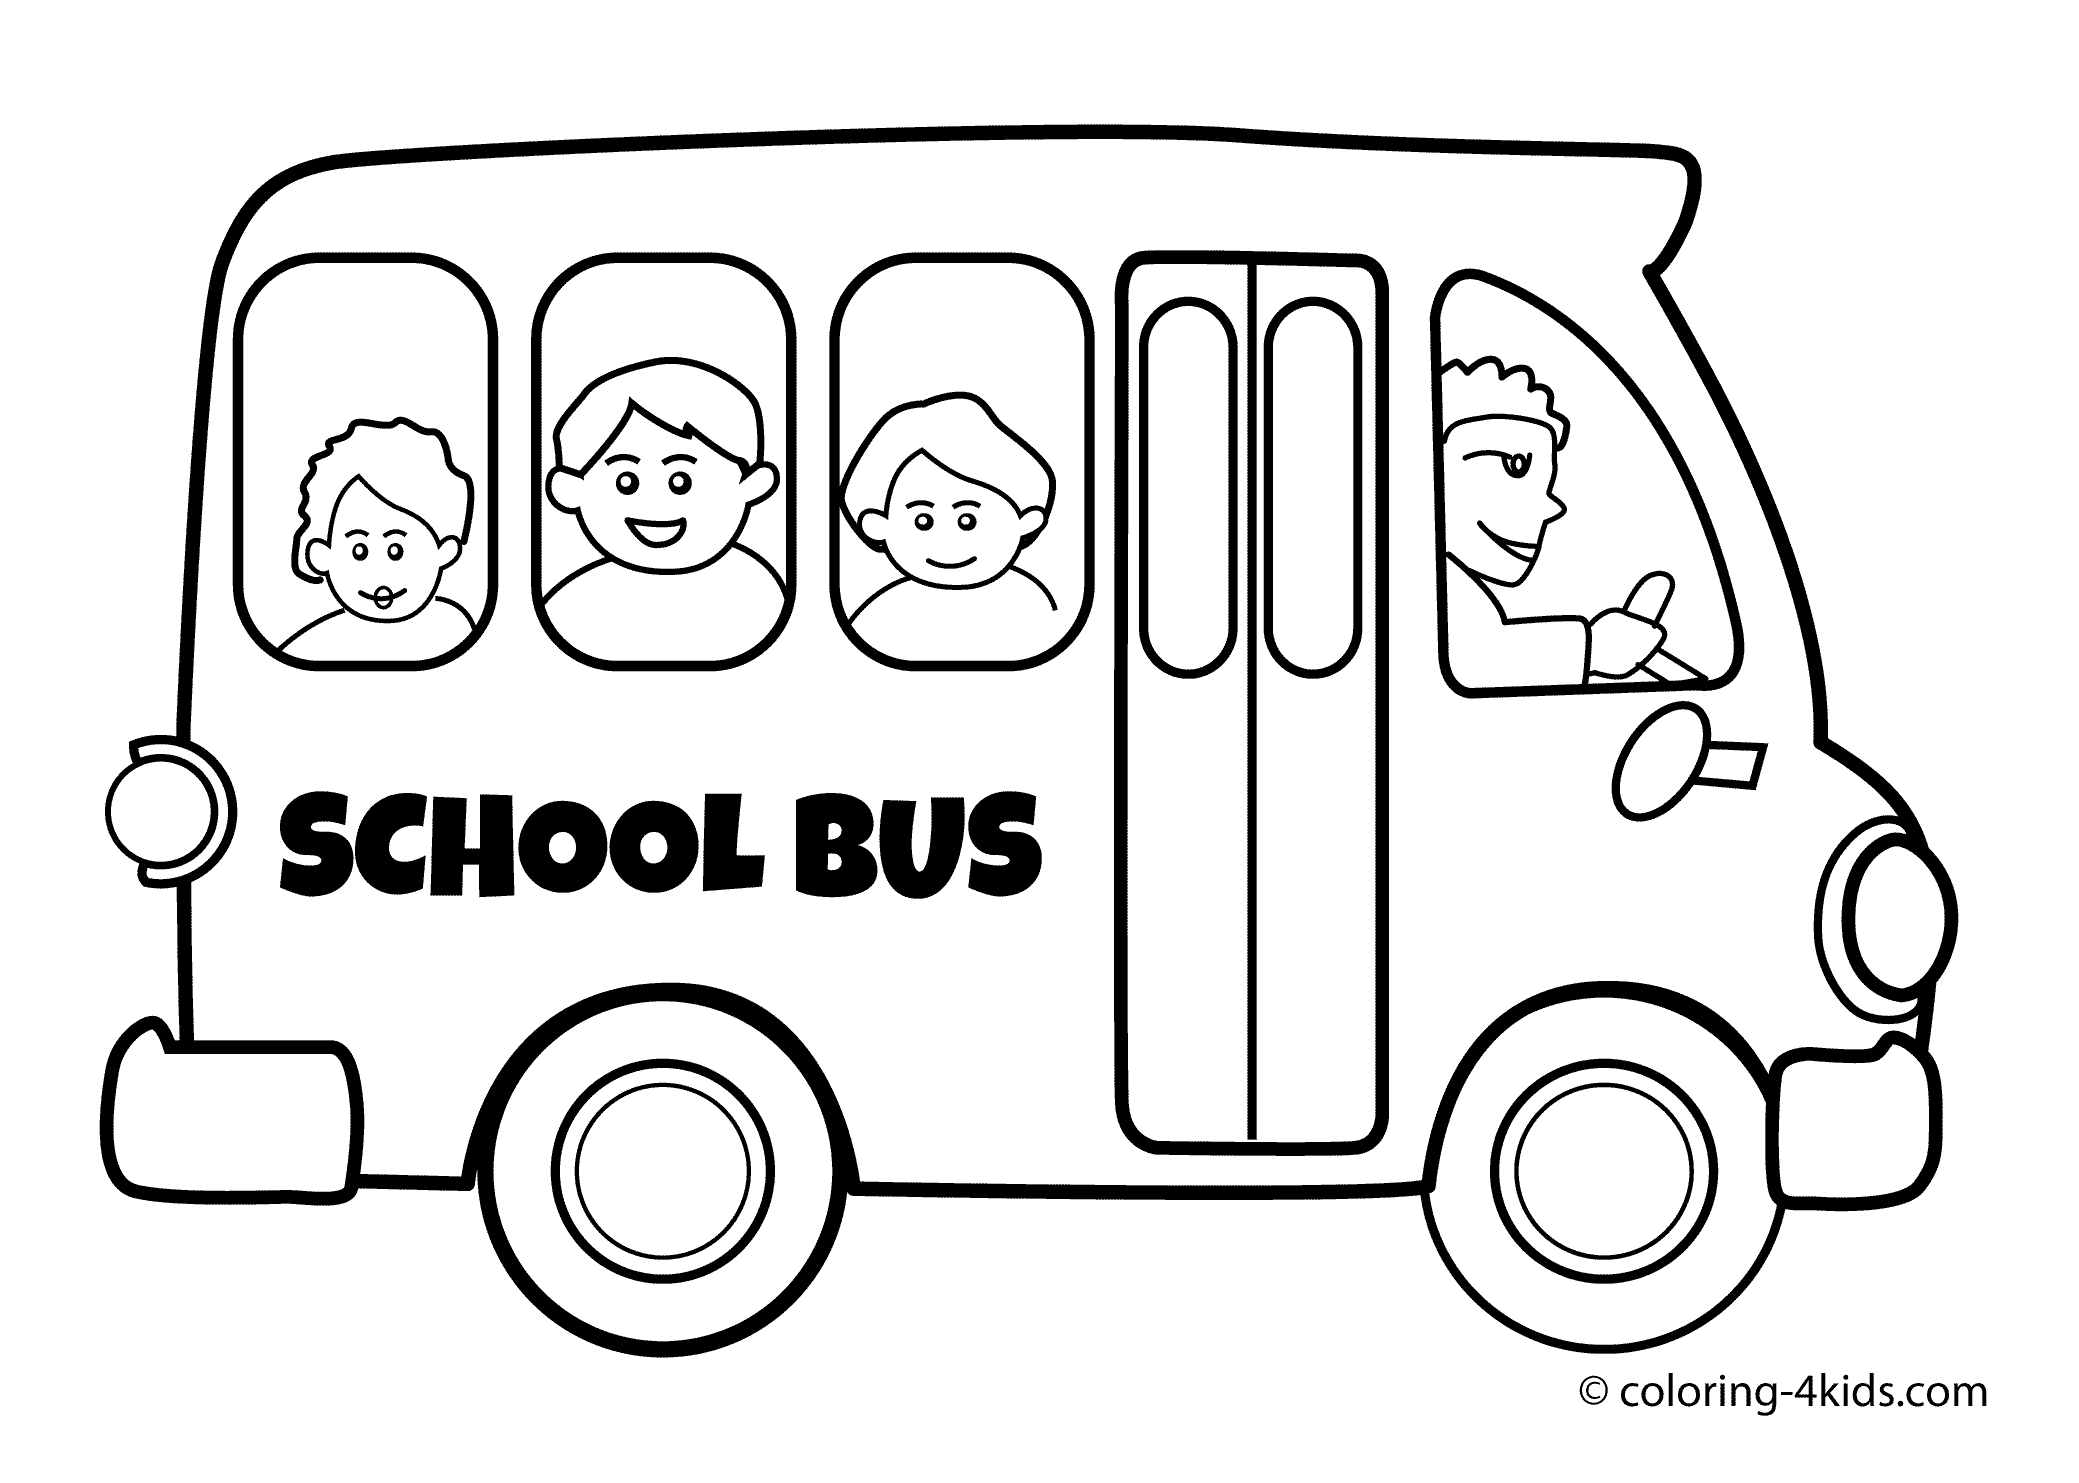 School bus Transporttation Coloring Pages